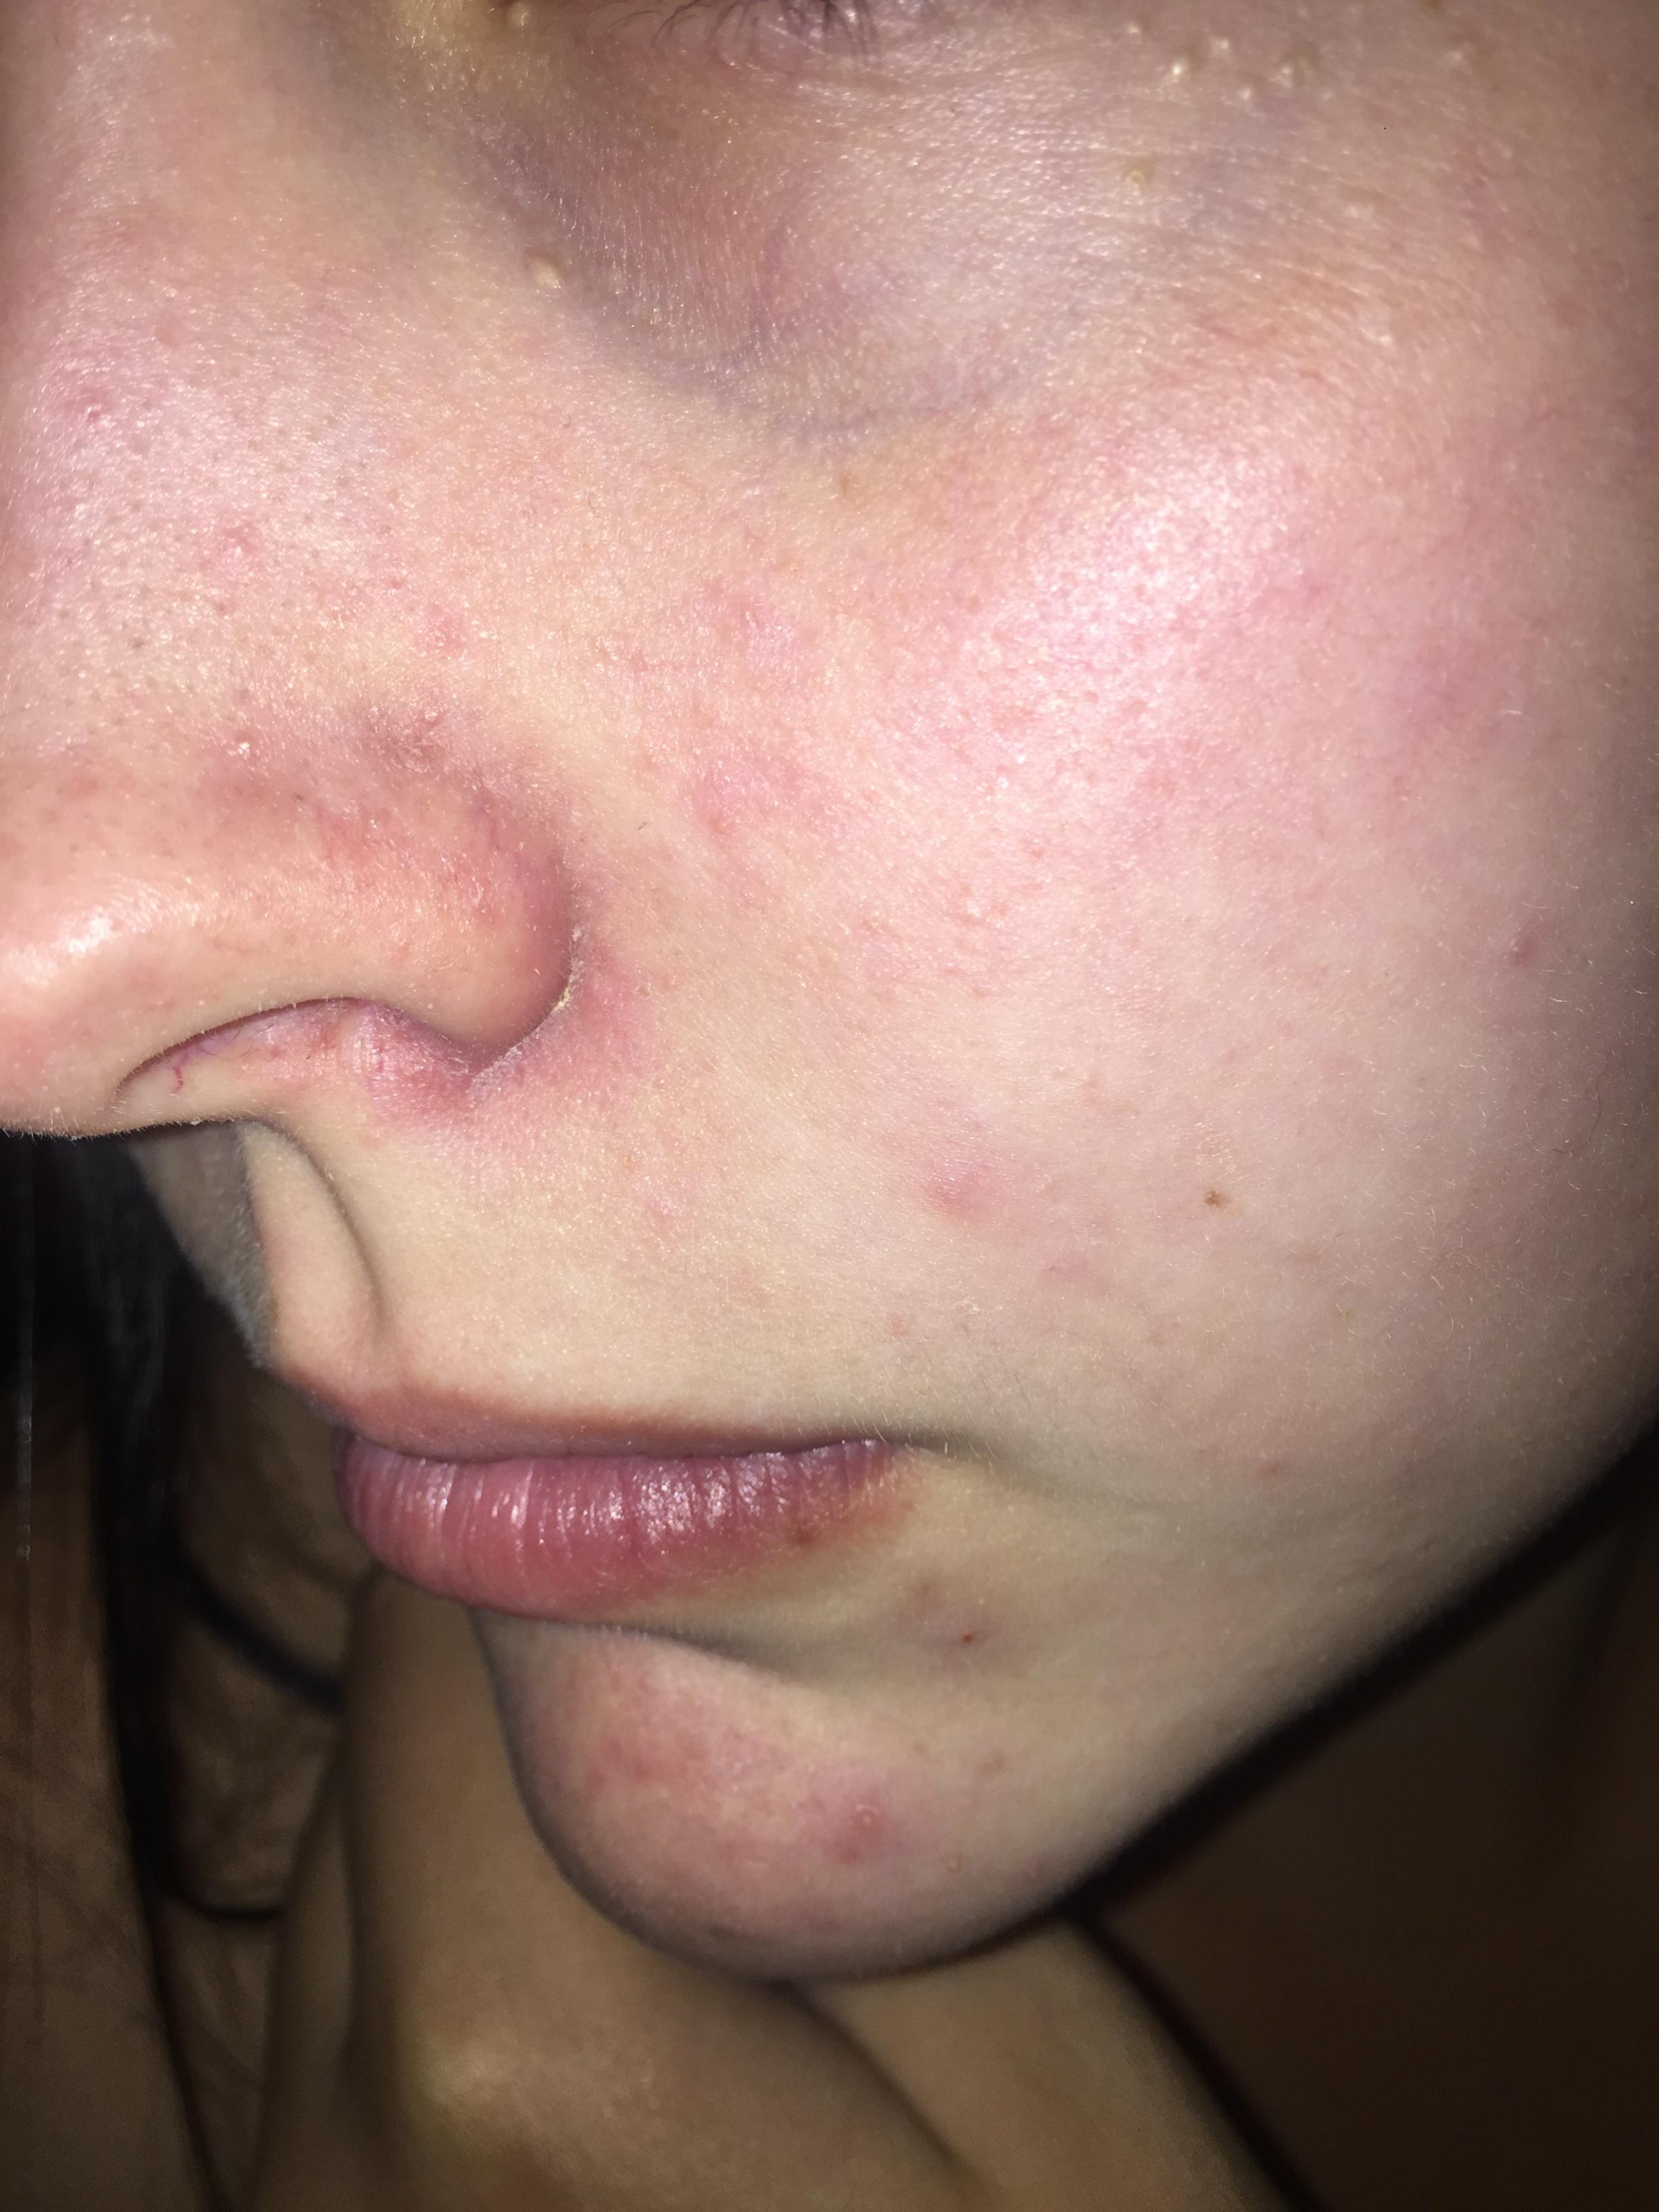 Redness Irritated Appearance On Face Rosacea And Facial Redness By